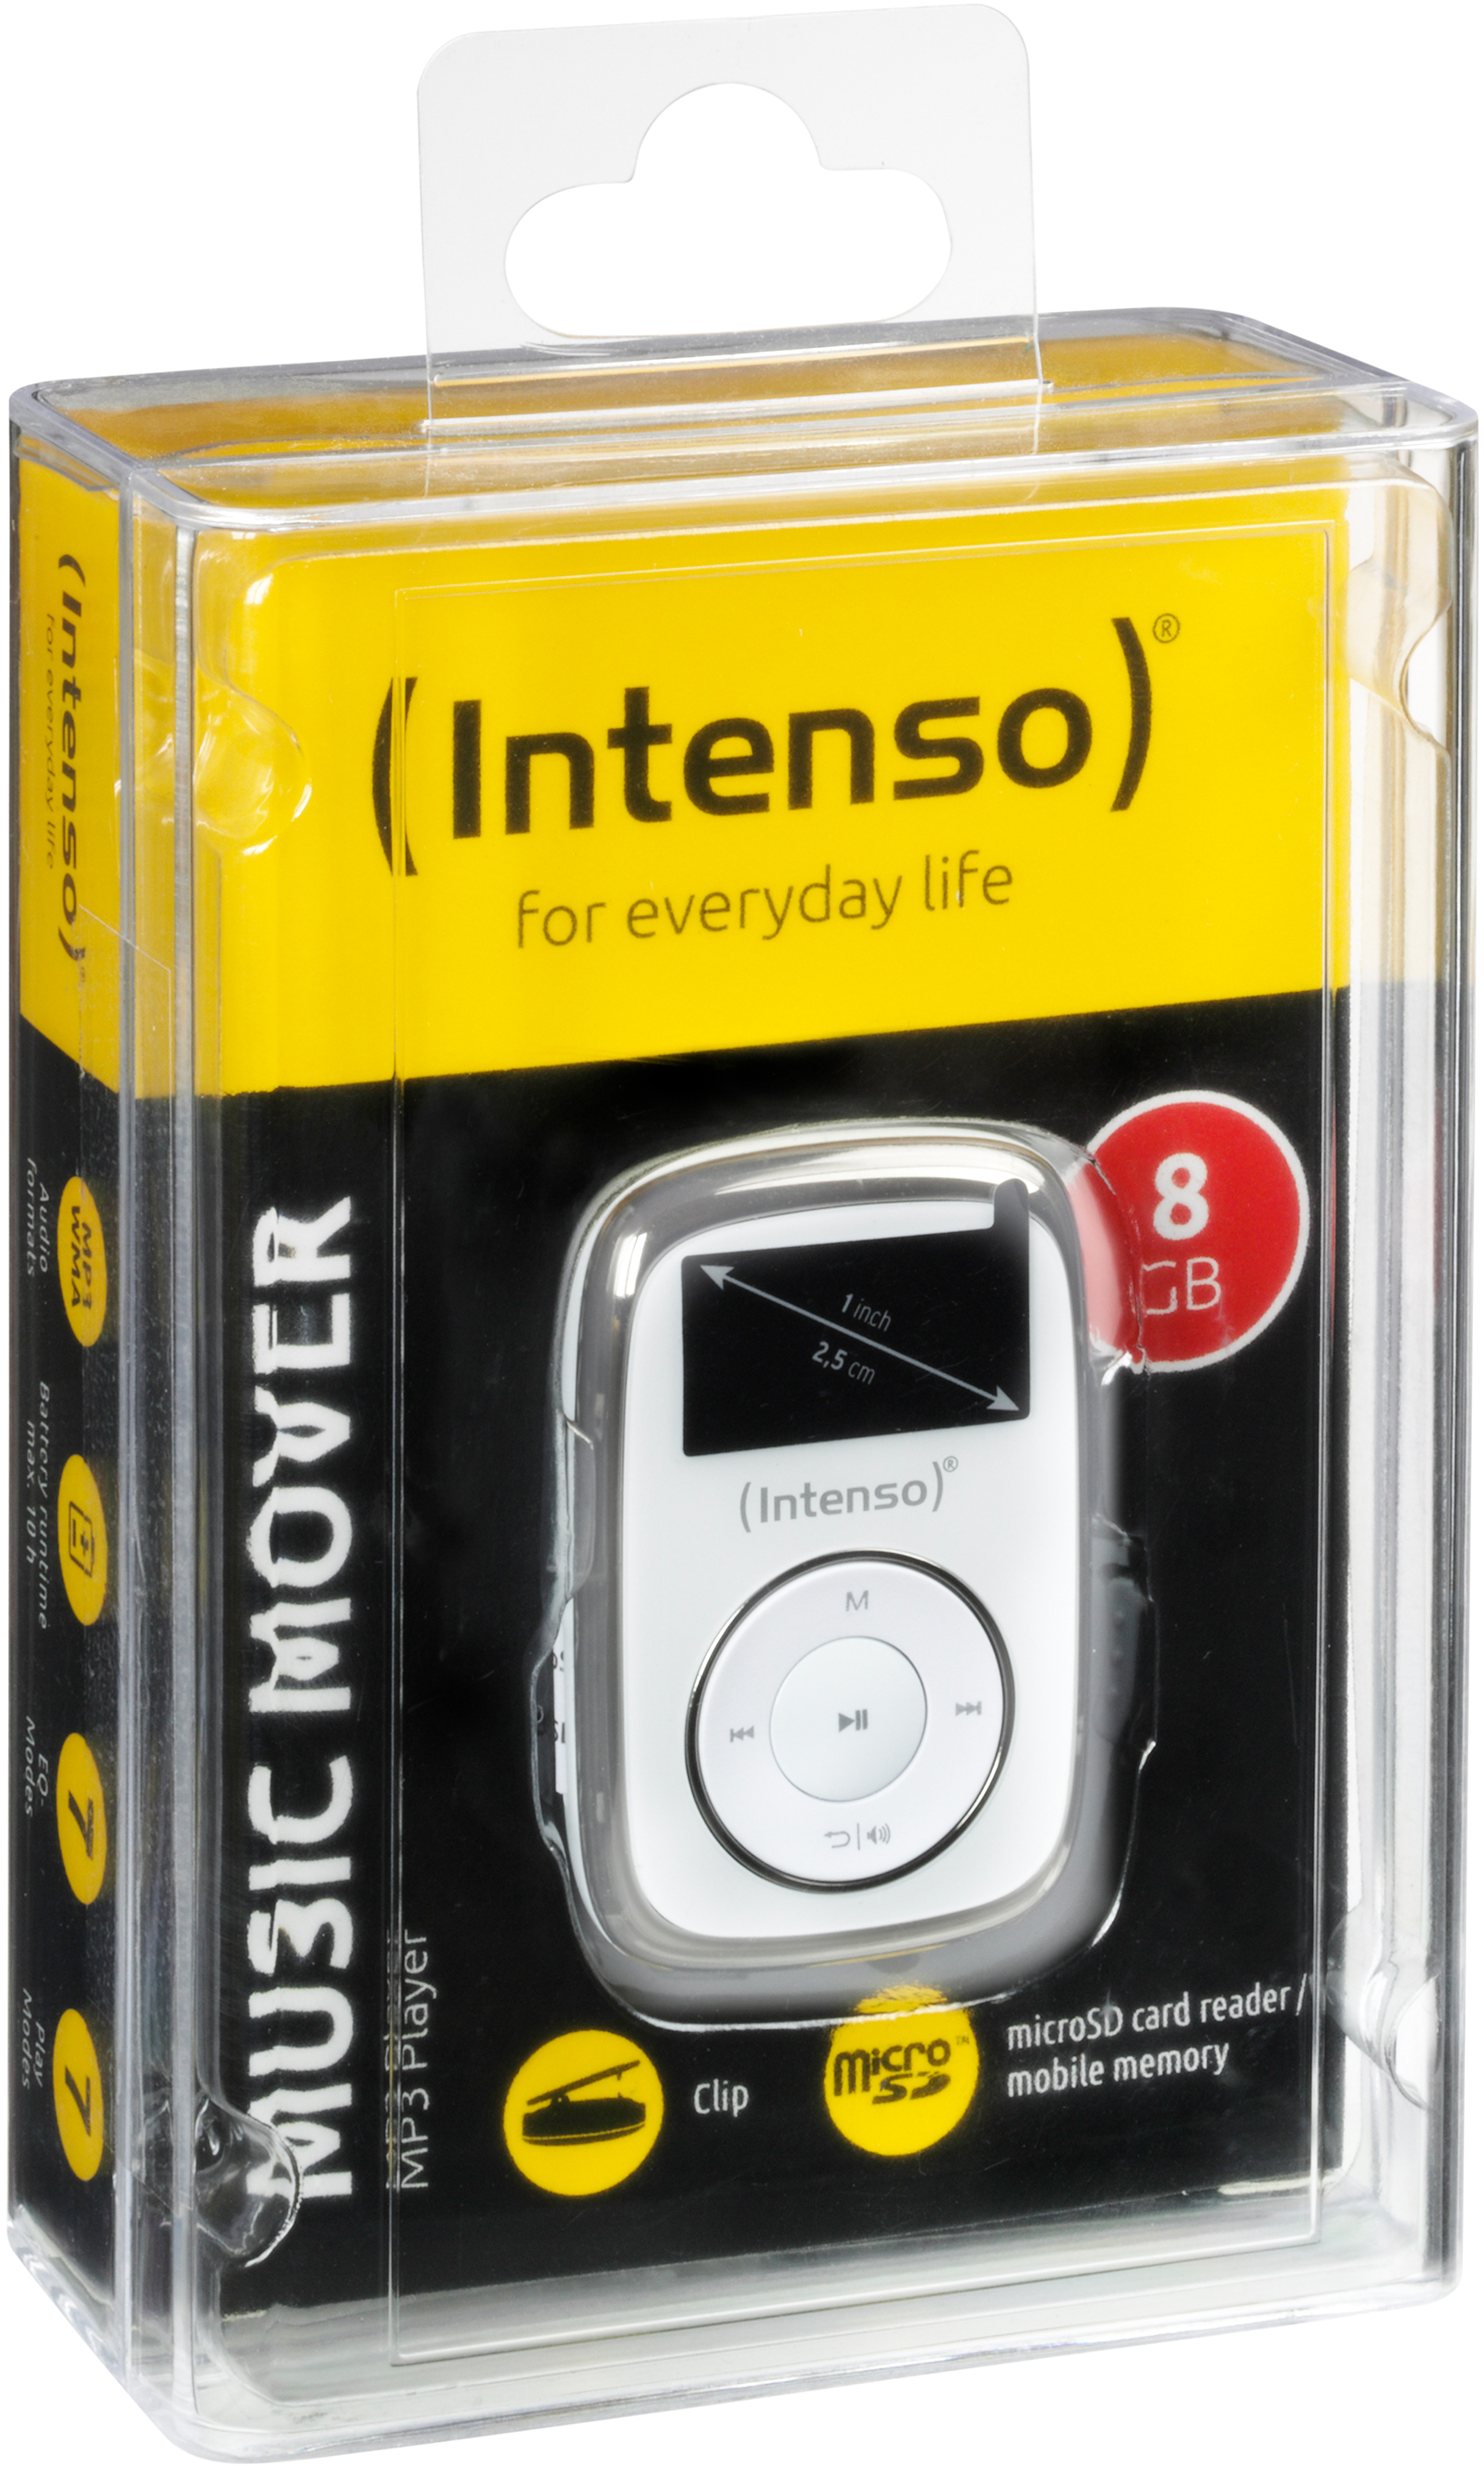 Mover GB, Mp3-Player Music INTENSO Weiß) (8